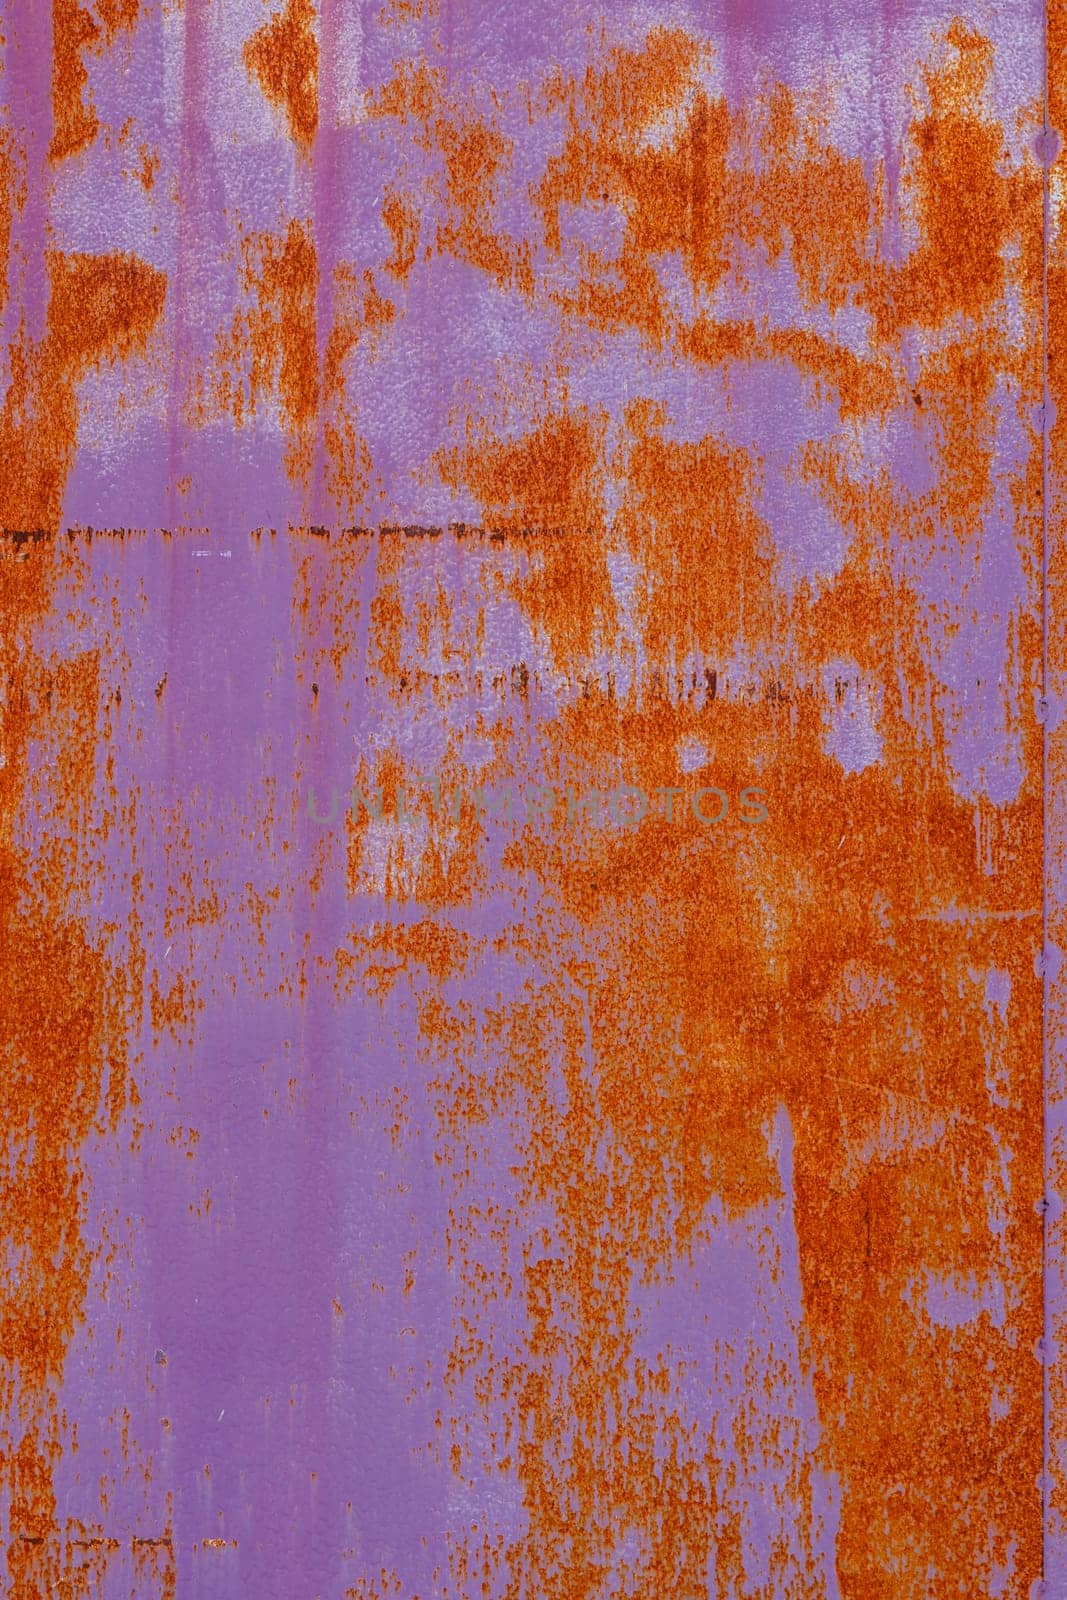 rusty red painted flat sheet metal surface with leftovers of pink paint full-frame background and texture.